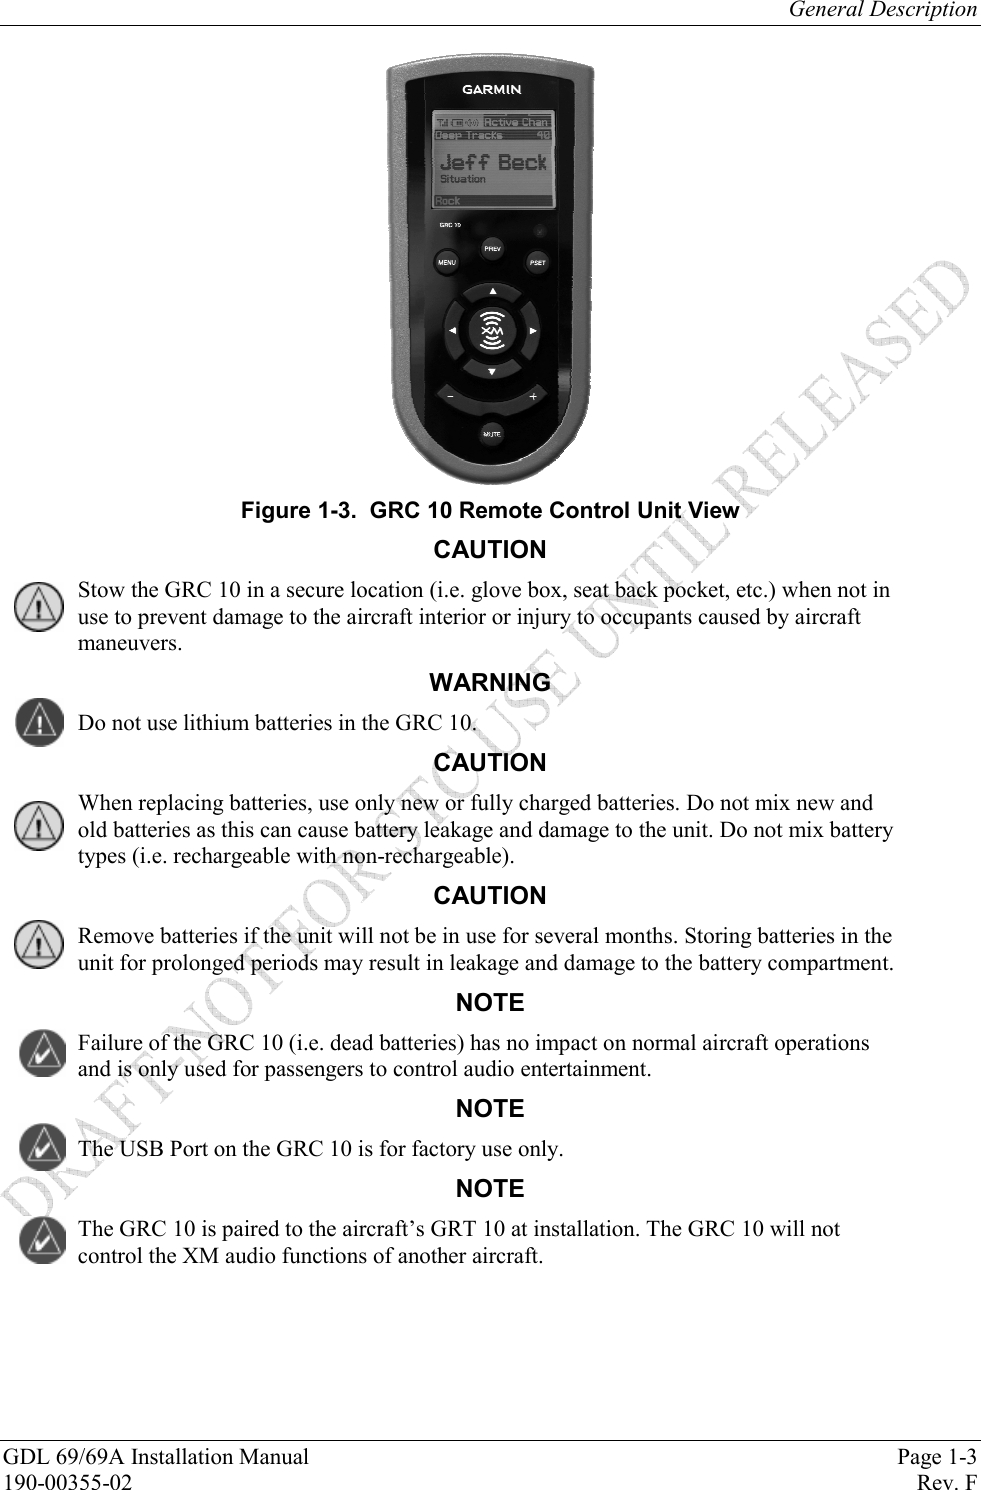 General Description GDL 69/69A Installation Manual  Page 1-3 190-00355-02   Rev. F  Figure 1-3.  GRC 10 Remote Control Unit View CAUTION Stow the GRC 10 in a secure location (i.e. glove box, seat back pocket, etc.) when not in use to prevent damage to the aircraft interior or injury to occupants caused by aircraft maneuvers.  WARNING Do not use lithium batteries in the GRC 10.  CAUTION When replacing batteries, use only new or fully charged batteries. Do not mix new and old batteries as this can cause battery leakage and damage to the unit. Do not mix battery types (i.e. rechargeable with non-rechargeable). CAUTION Remove batteries if the unit will not be in use for several months. Storing batteries in the unit for prolonged periods may result in leakage and damage to the battery compartment. NOTE Failure of the GRC 10 (i.e. dead batteries) has no impact on normal aircraft operations and is only used for passengers to control audio entertainment. NOTE The USB Port on the GRC 10 is for factory use only. NOTE The GRC 10 is paired to the aircraft’s GRT 10 at installation. The GRC 10 will not control the XM audio functions of another aircraft. 